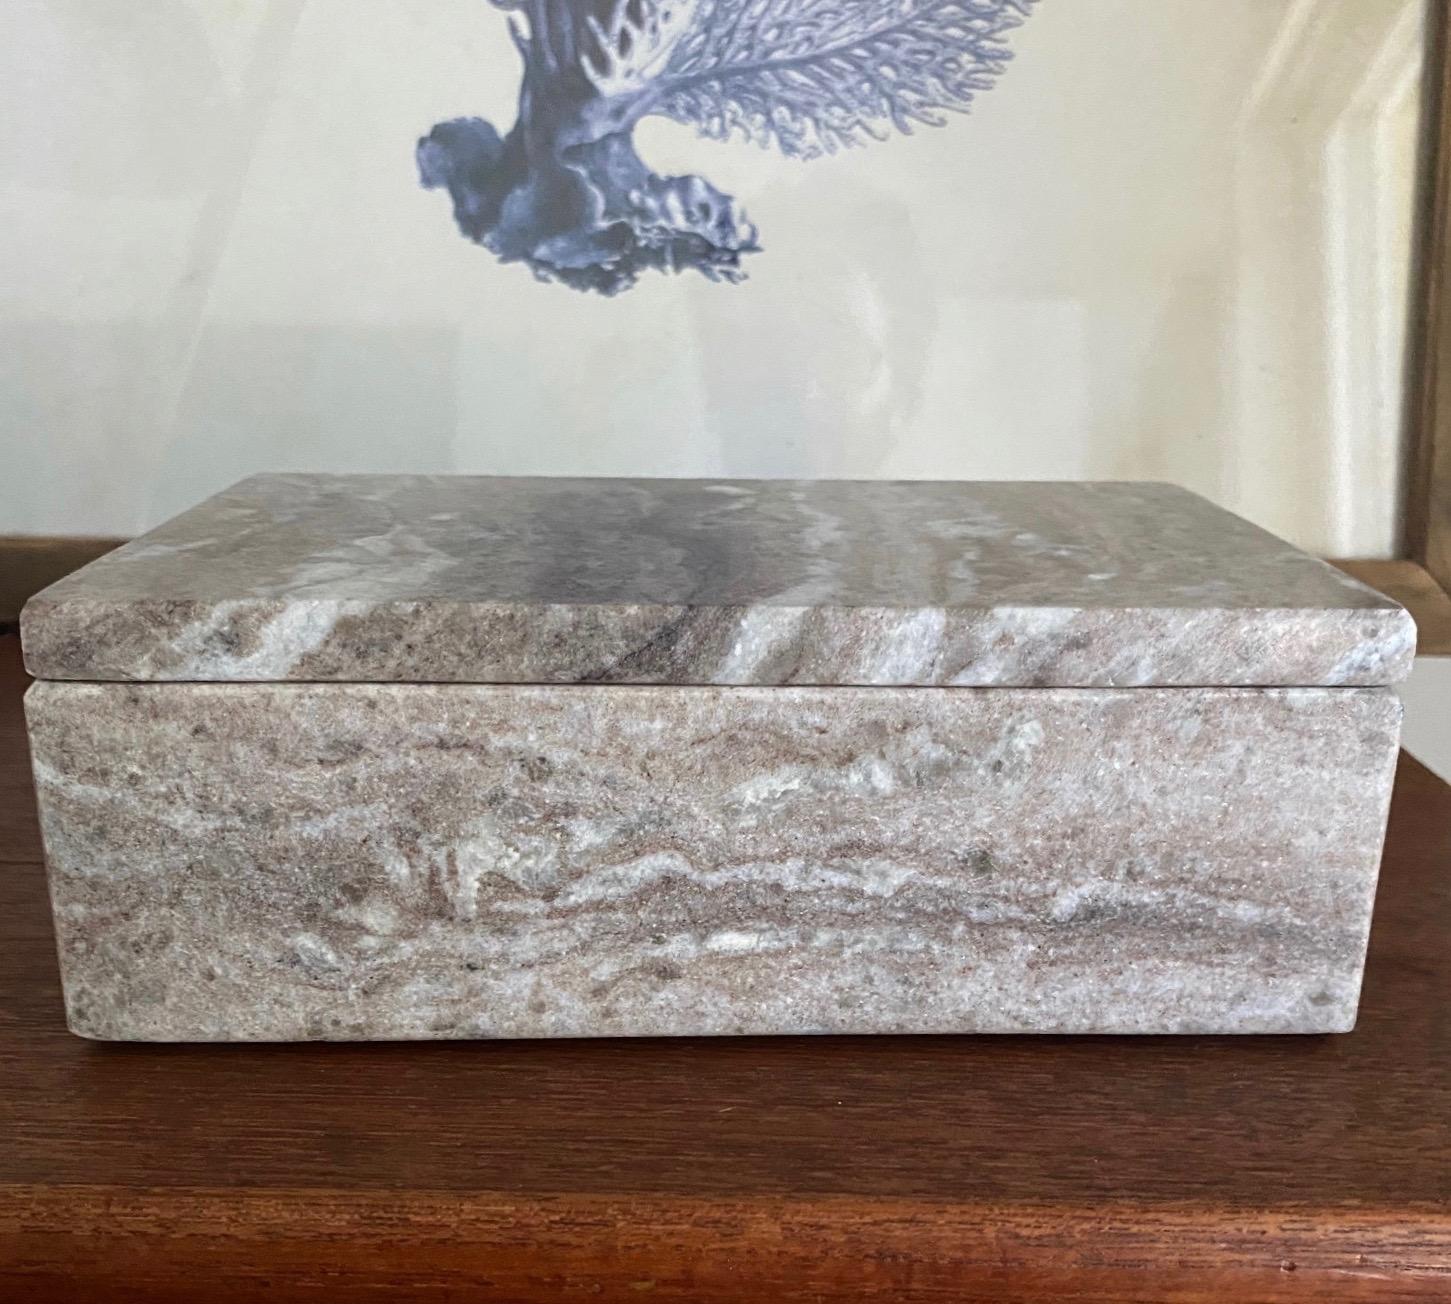 Indonesian Marble Stone Box with Stripes in Brown, Grey, and White